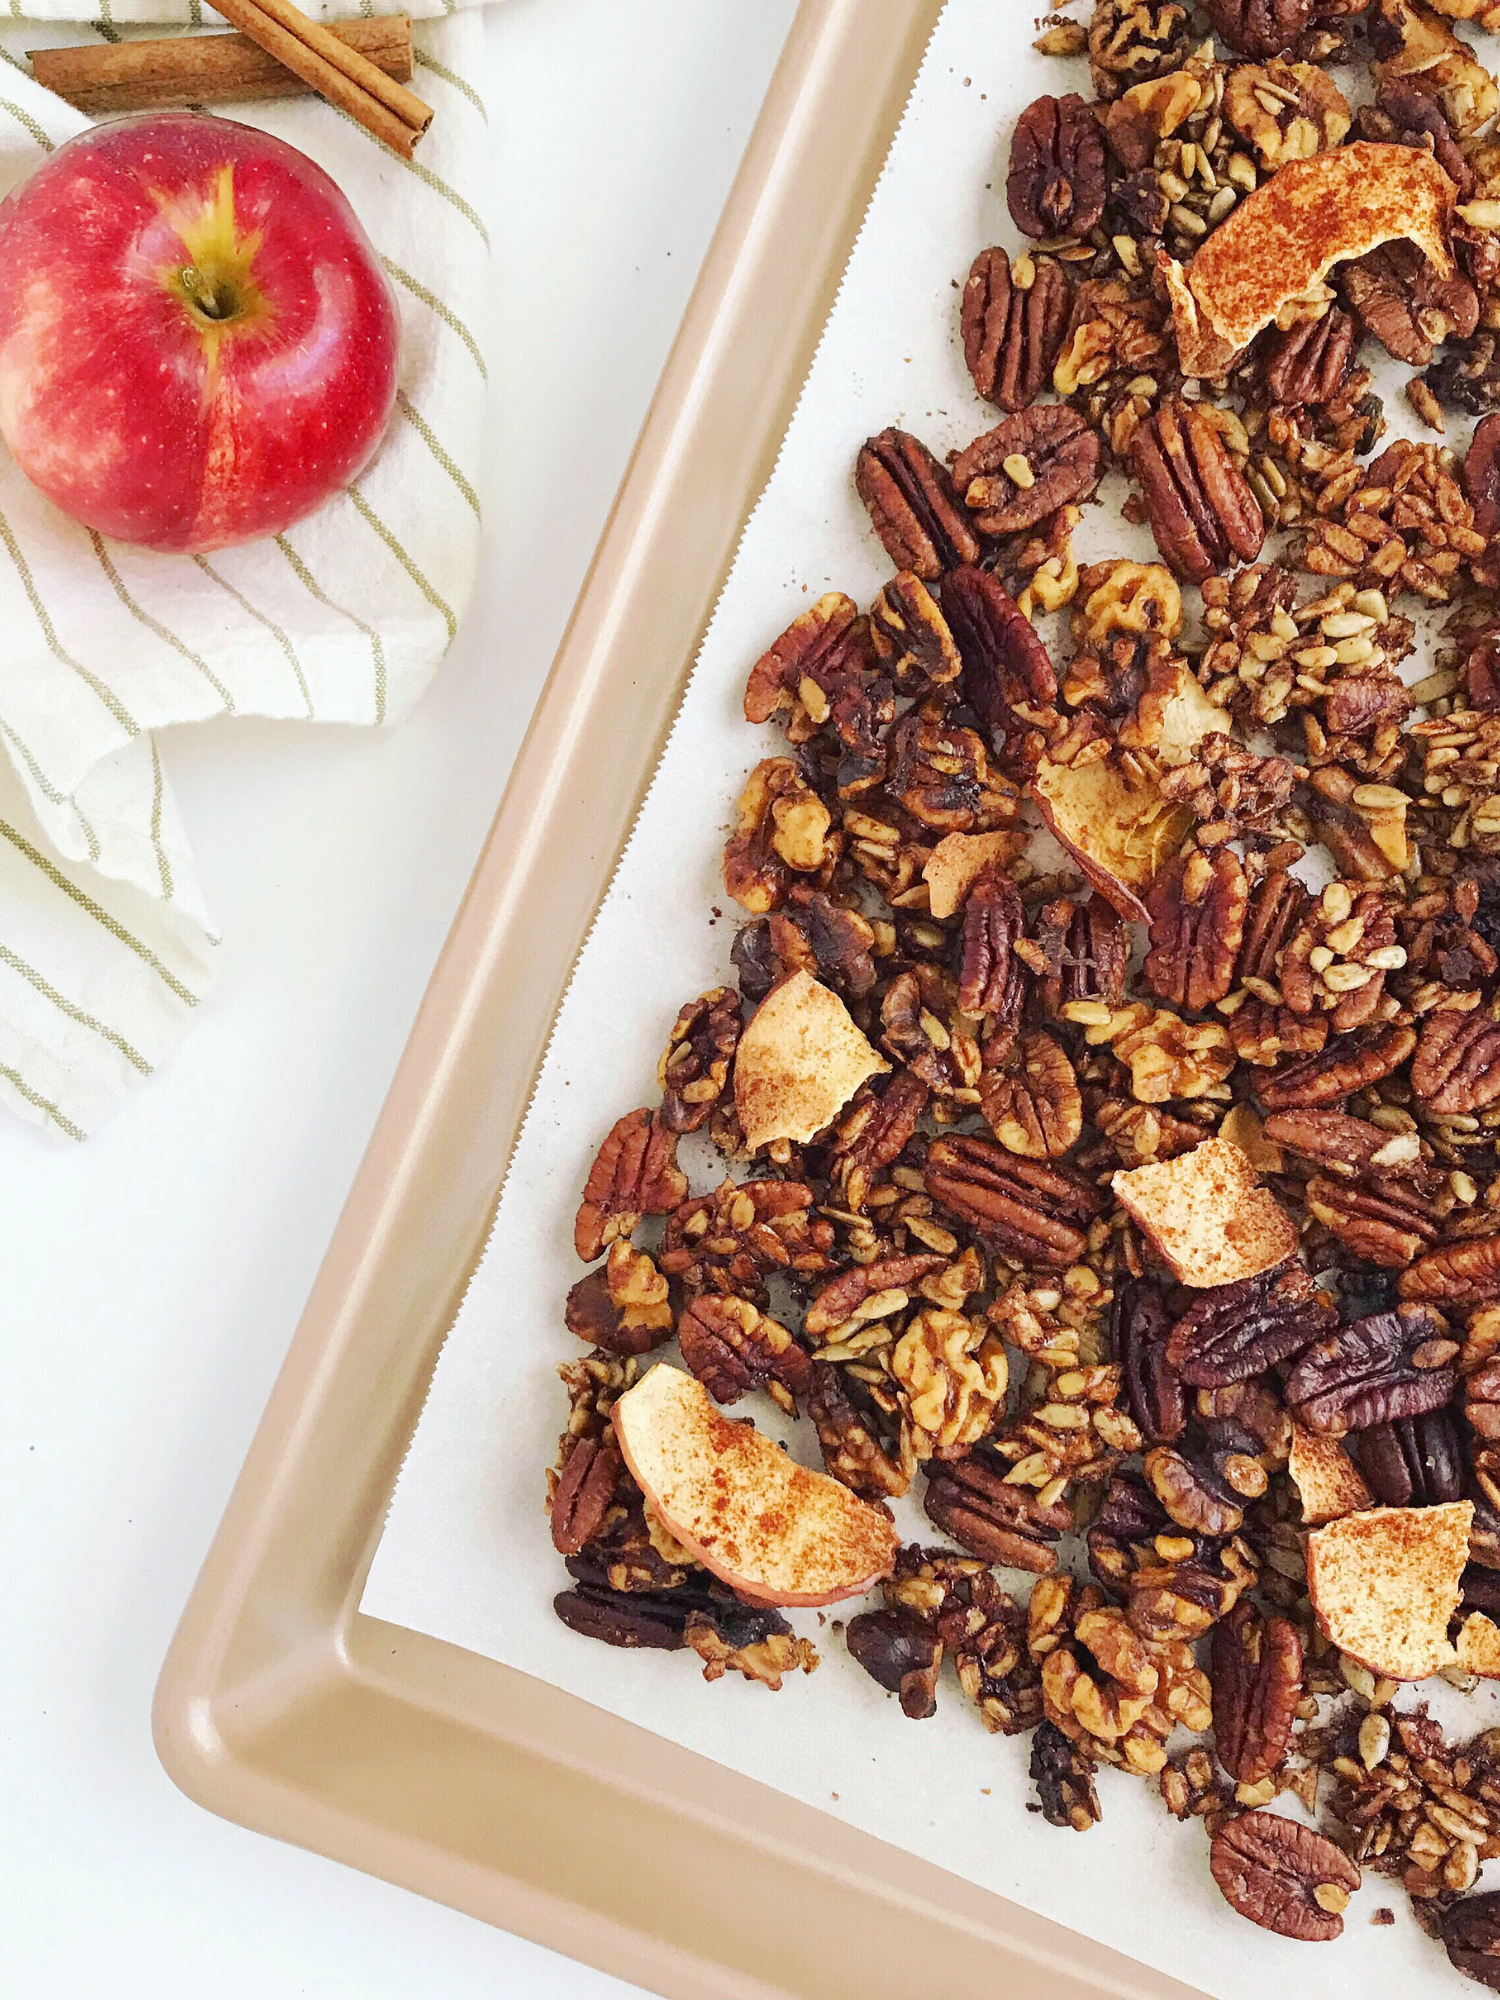 Grain-free cinnamon apple granola on a baking sheet with an apple and cinnamon sticks in the background.